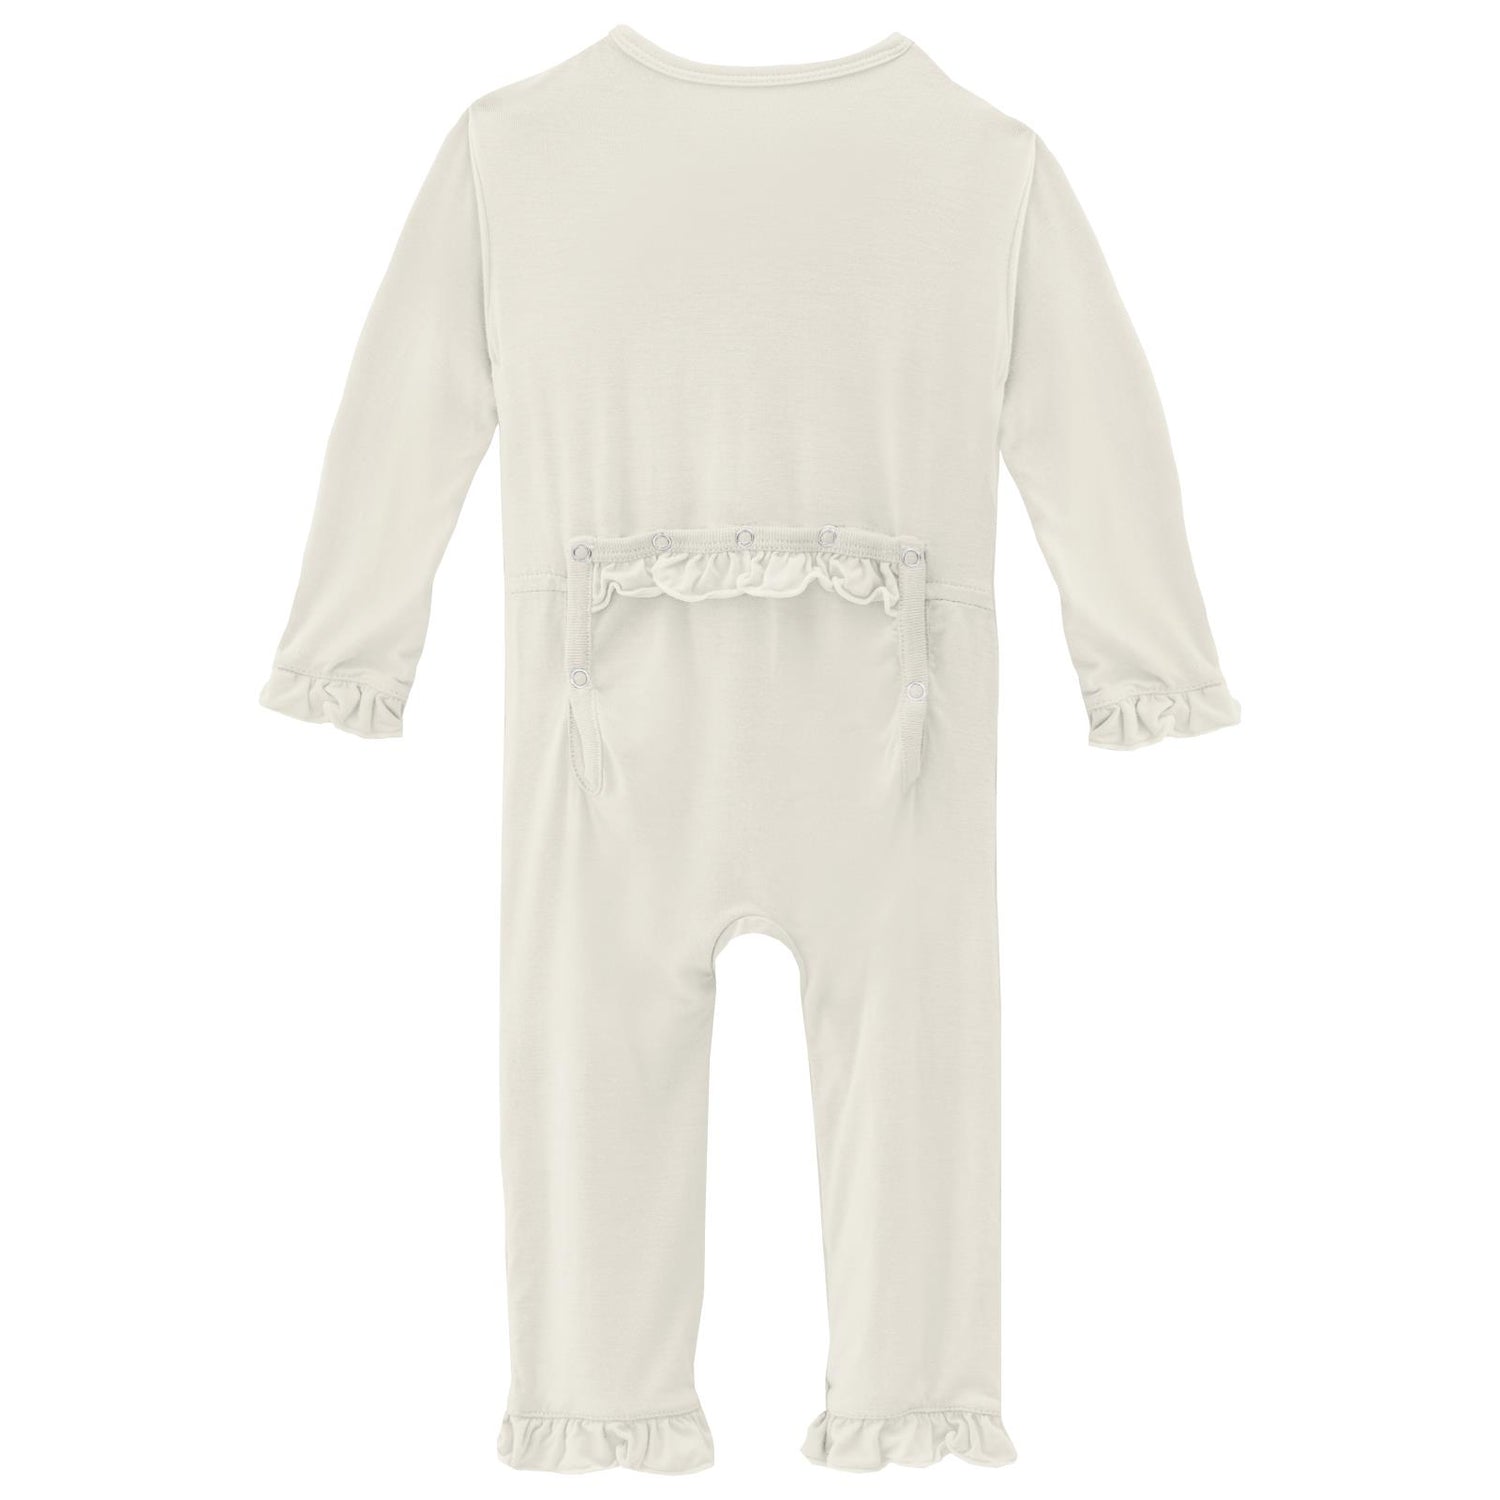 Classic Ruffle Coverall with 2 Way Zipper in Natural